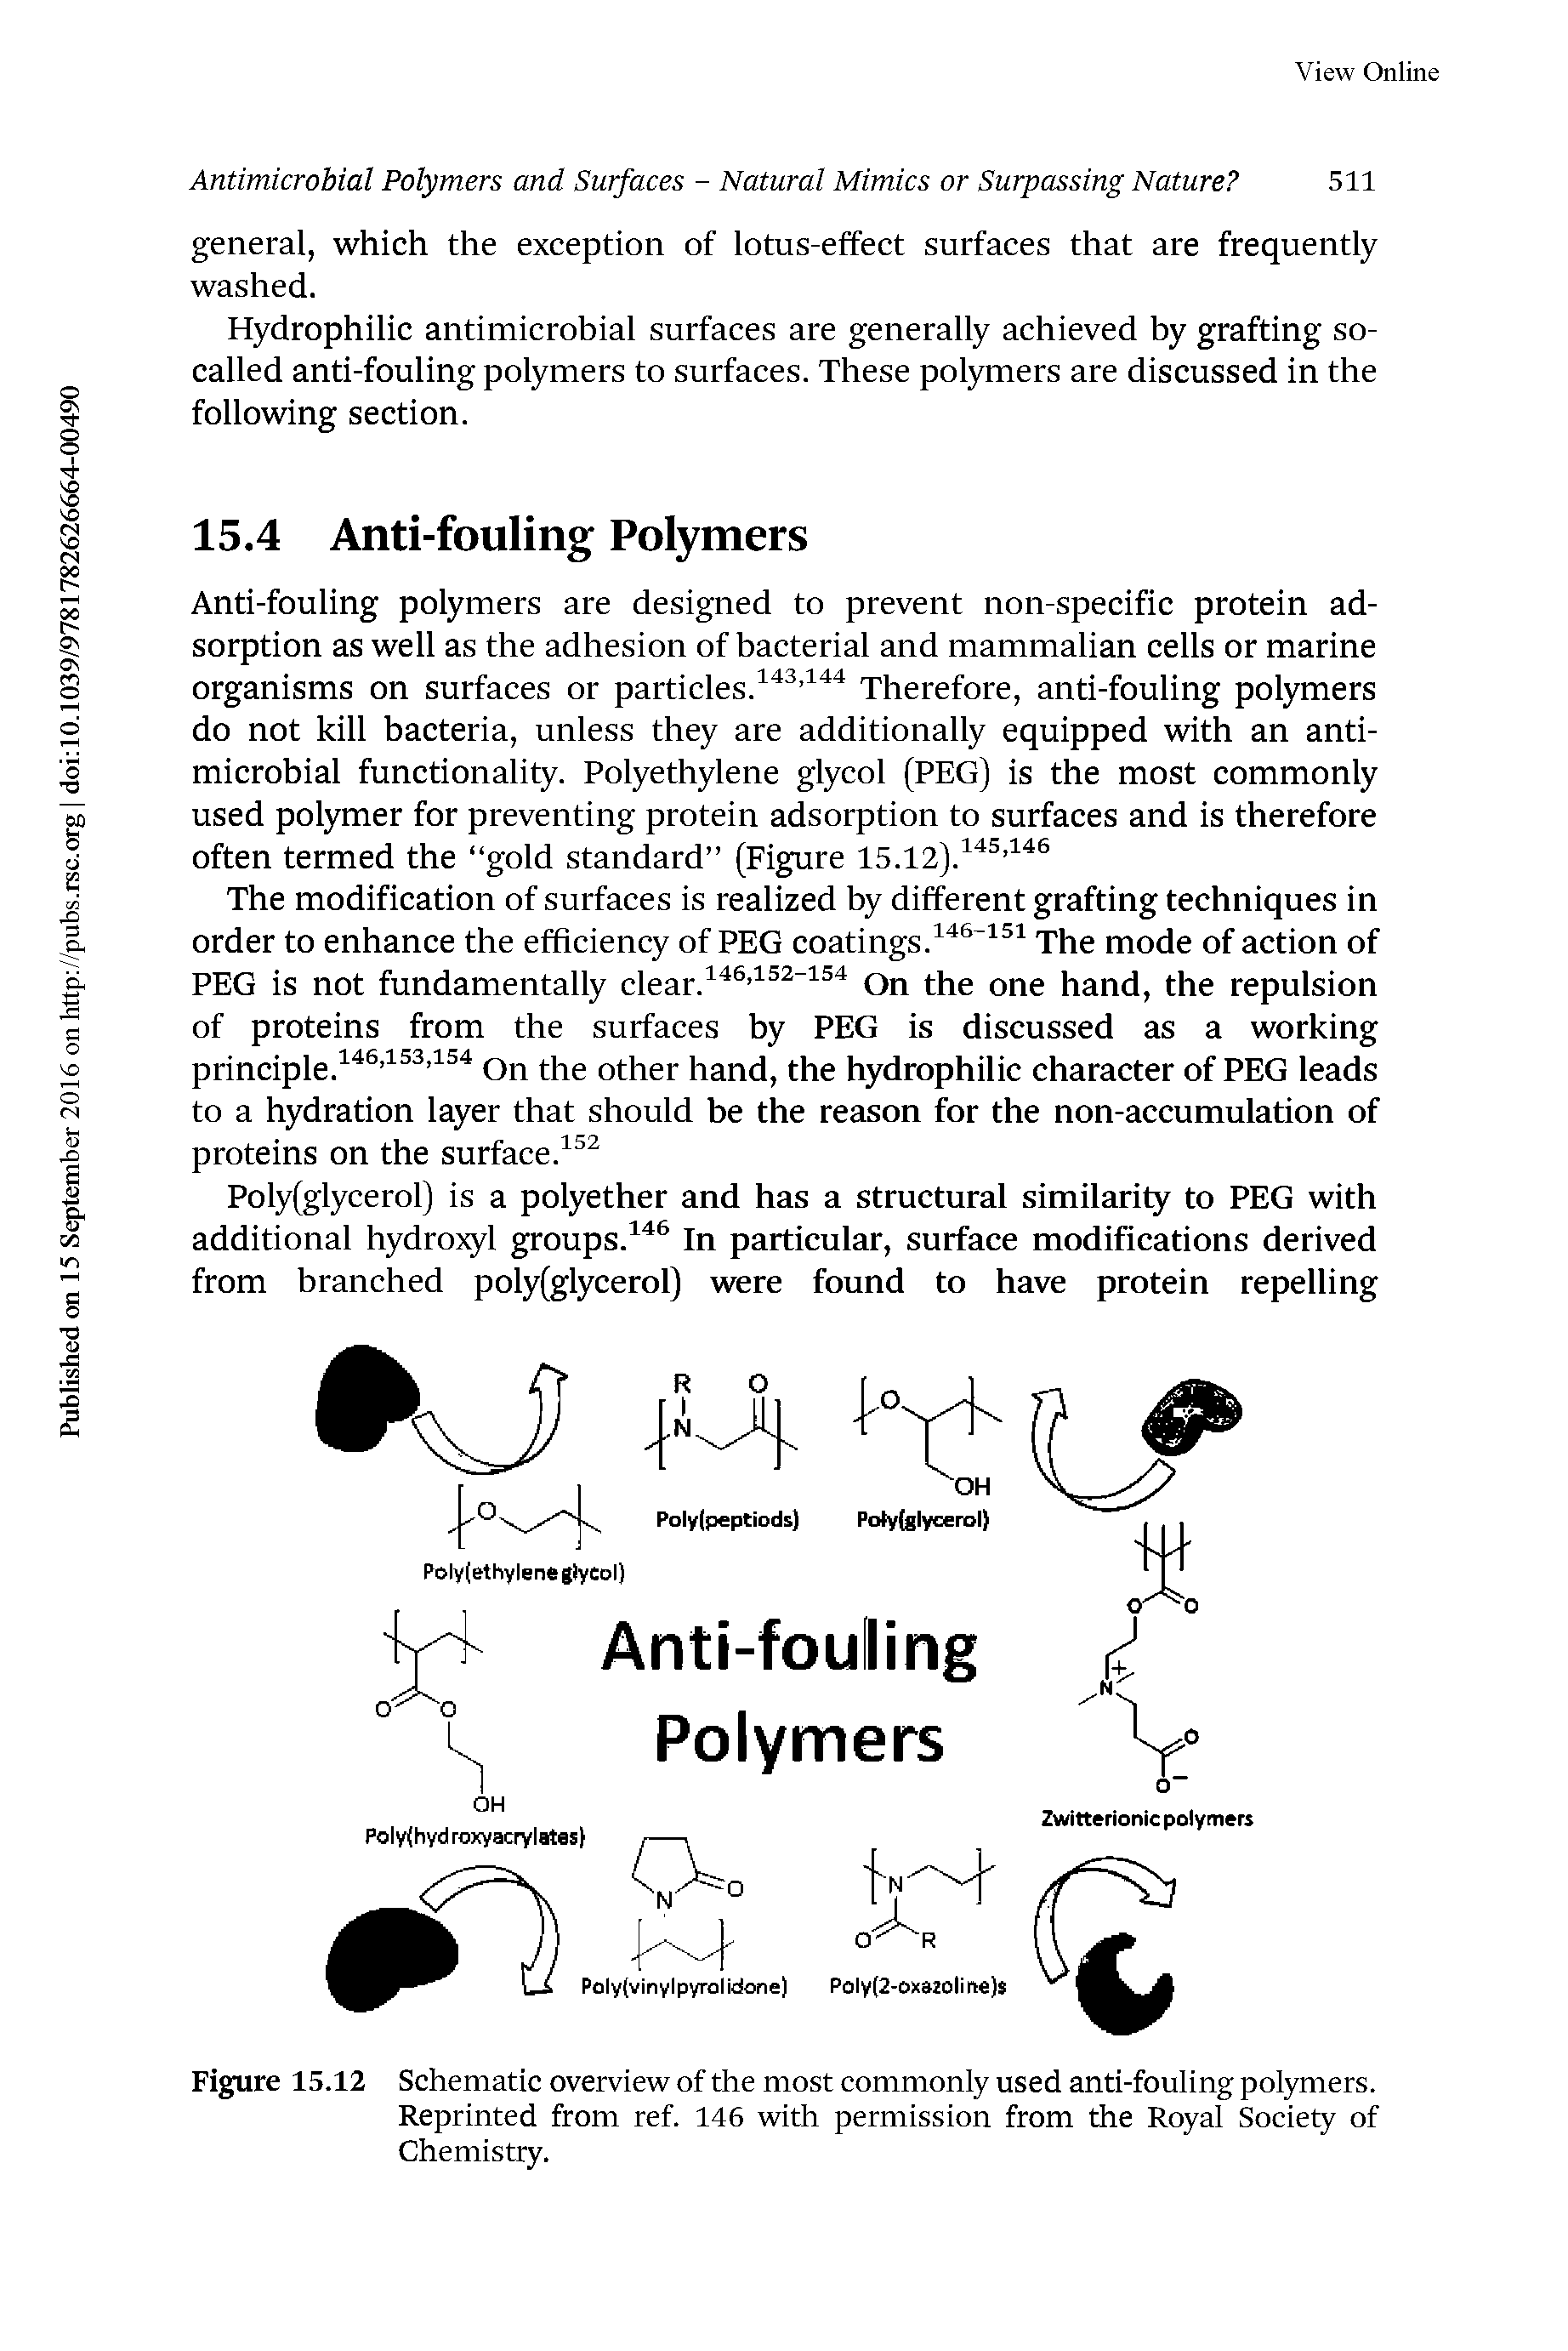 Figure 15.12 Schematic overview of the most commonly used anti-fouling polymers.